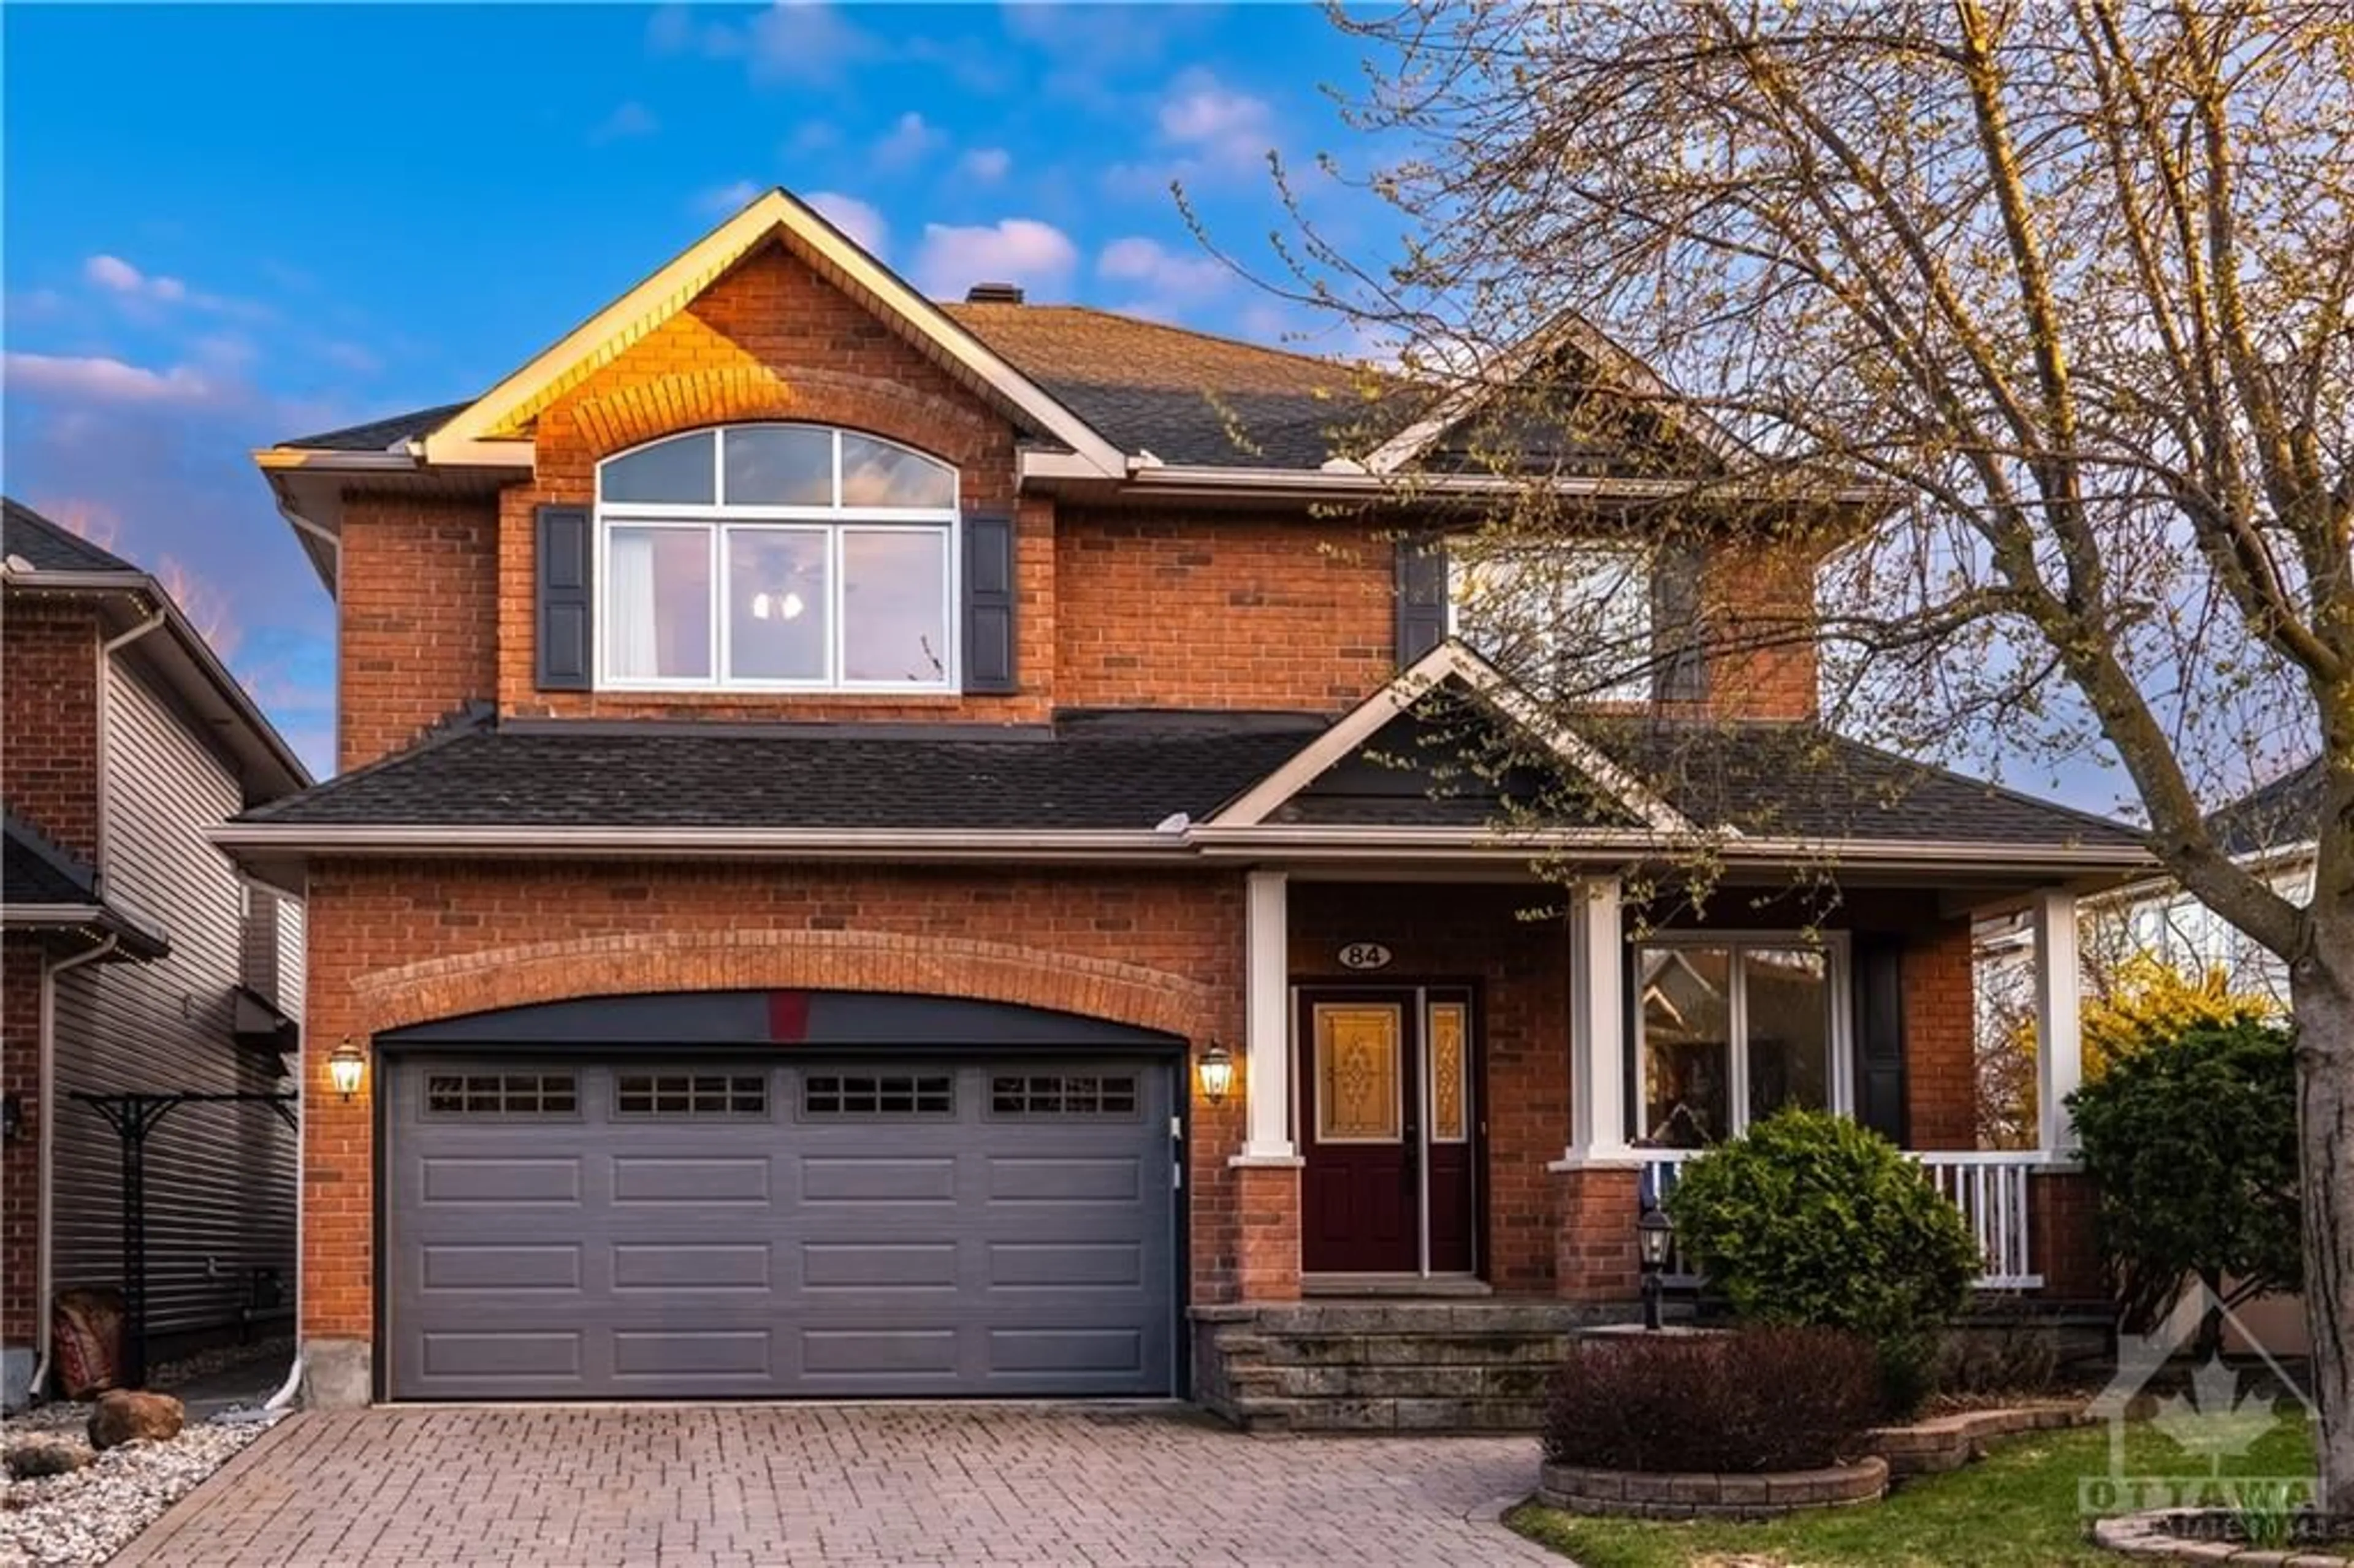 Home with brick exterior material for 84 BARONESS Dr, Ottawa Ontario K2G 6S2